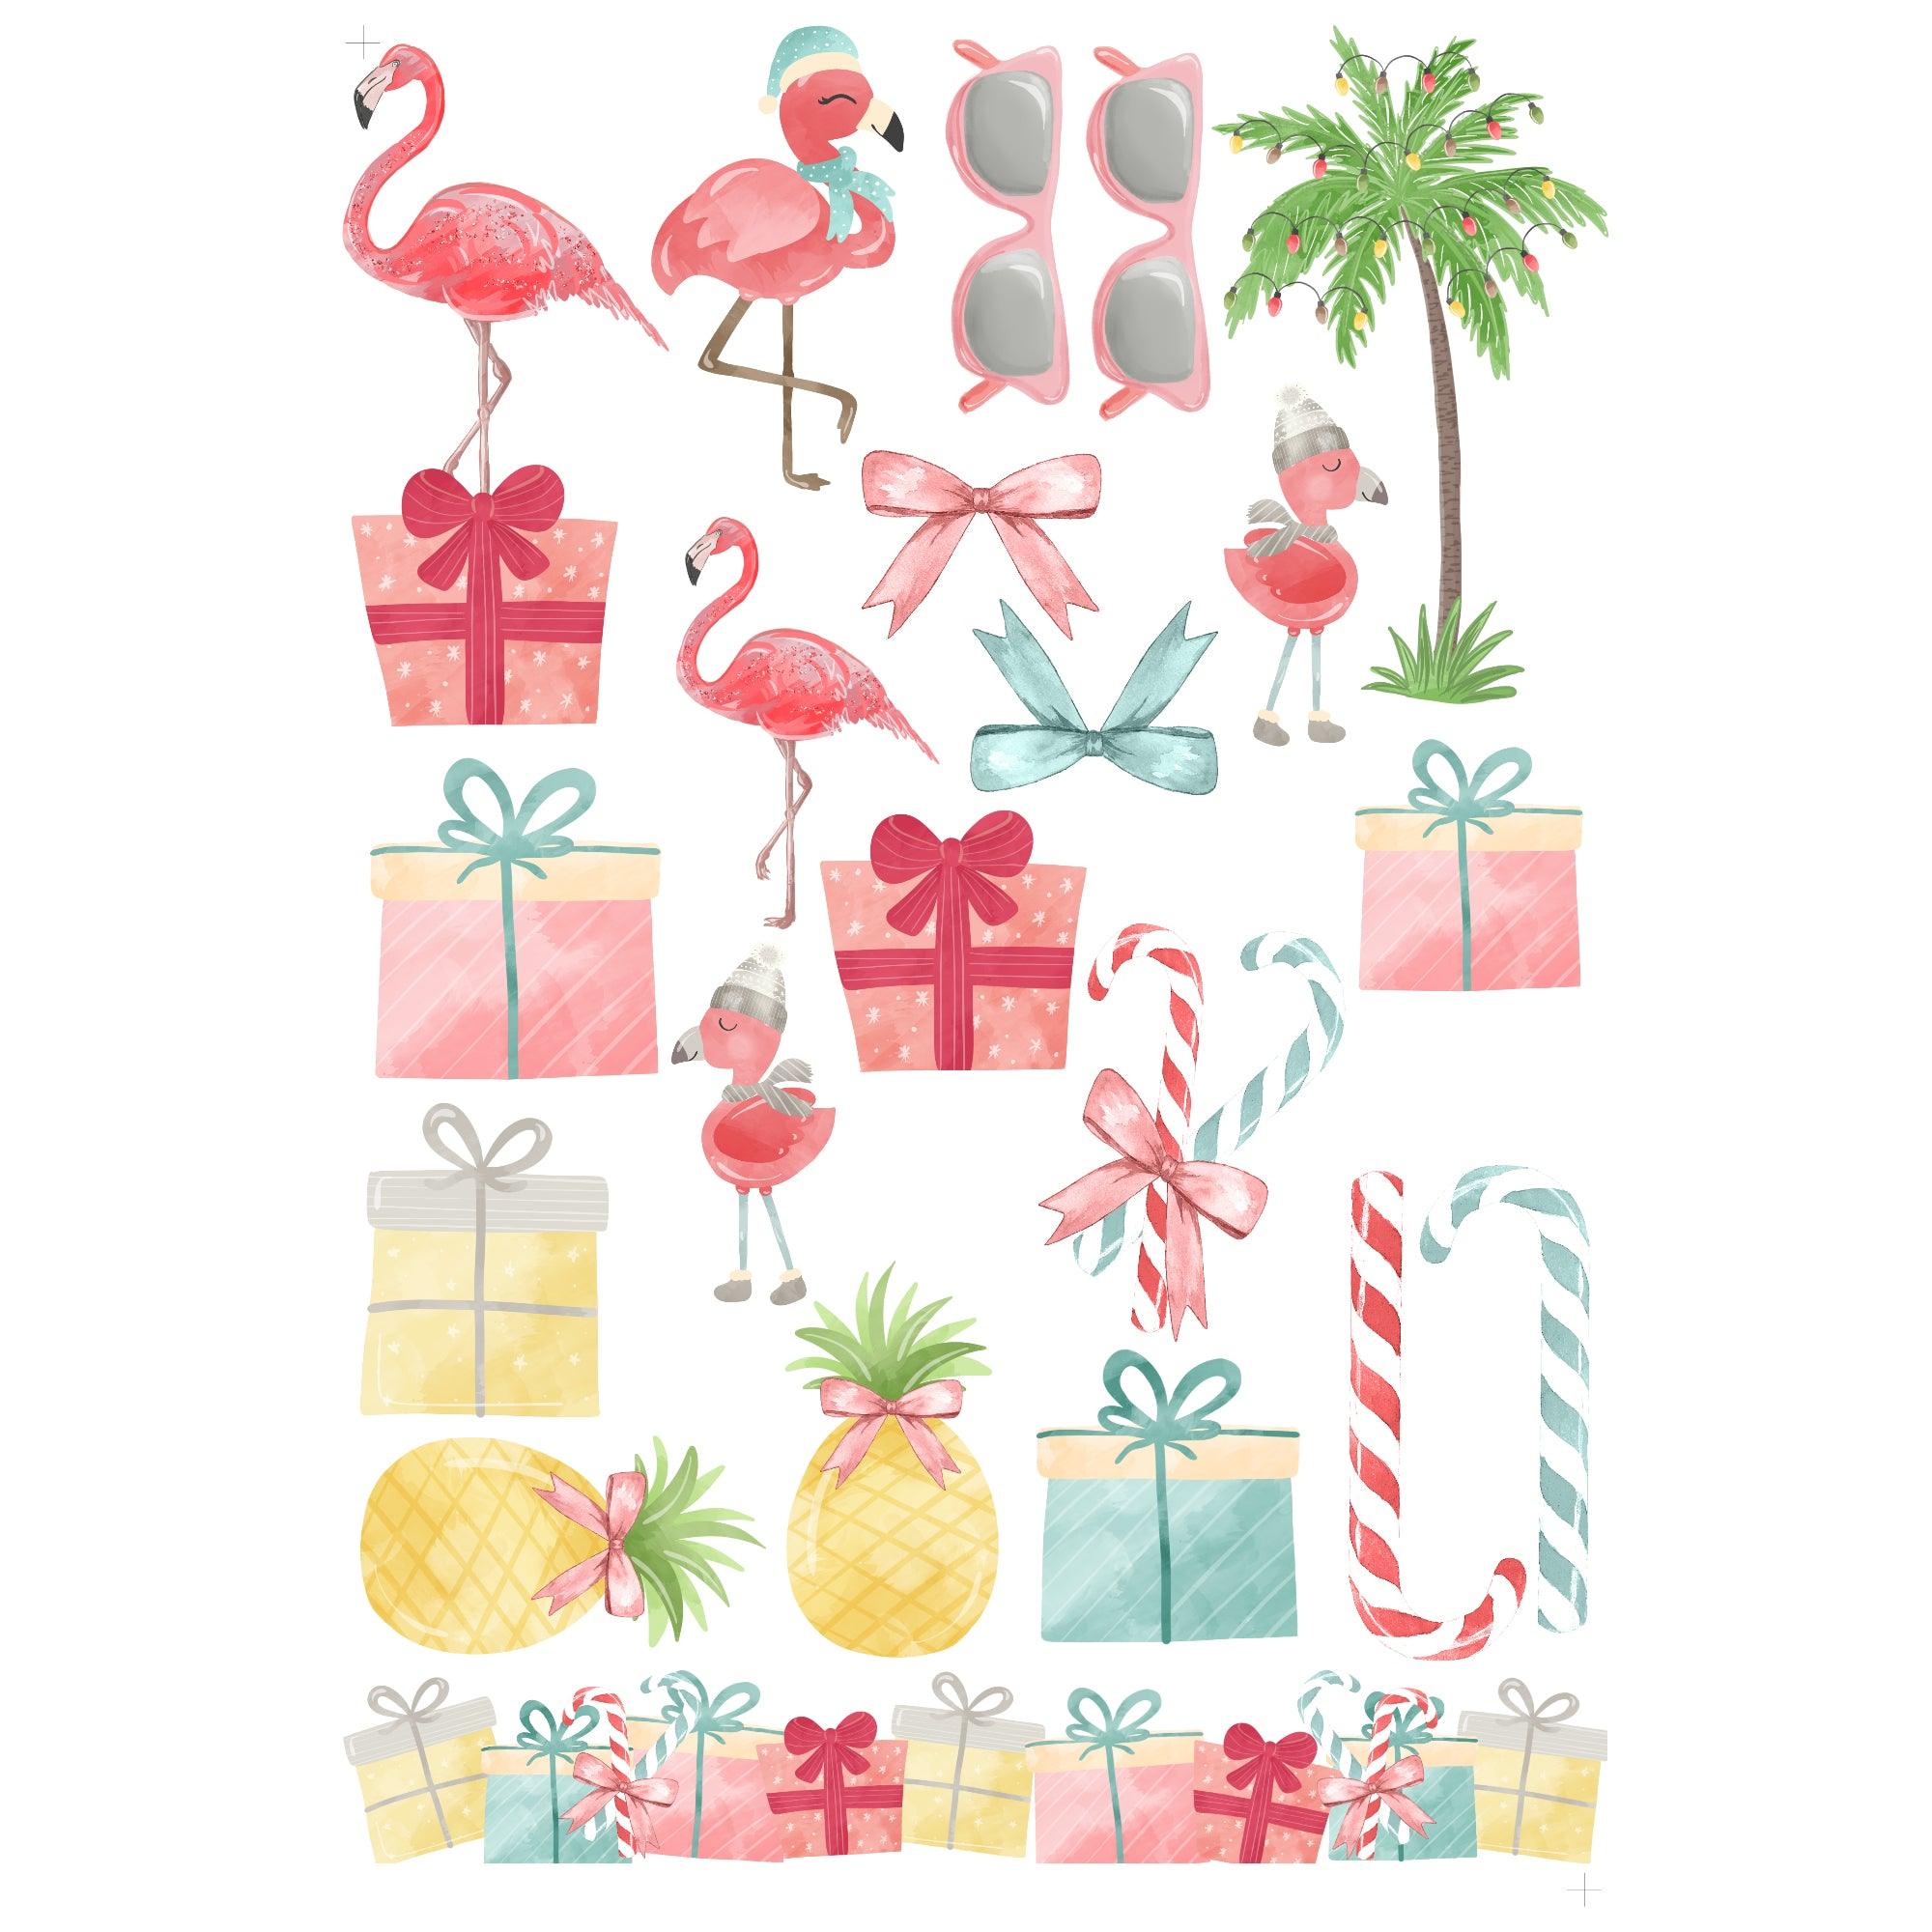 Flamingo Christmas Collection 12 x 12 Scrapbook Paper & Embellishment Kit by SSC Designs - Scrapbook Supply Companies